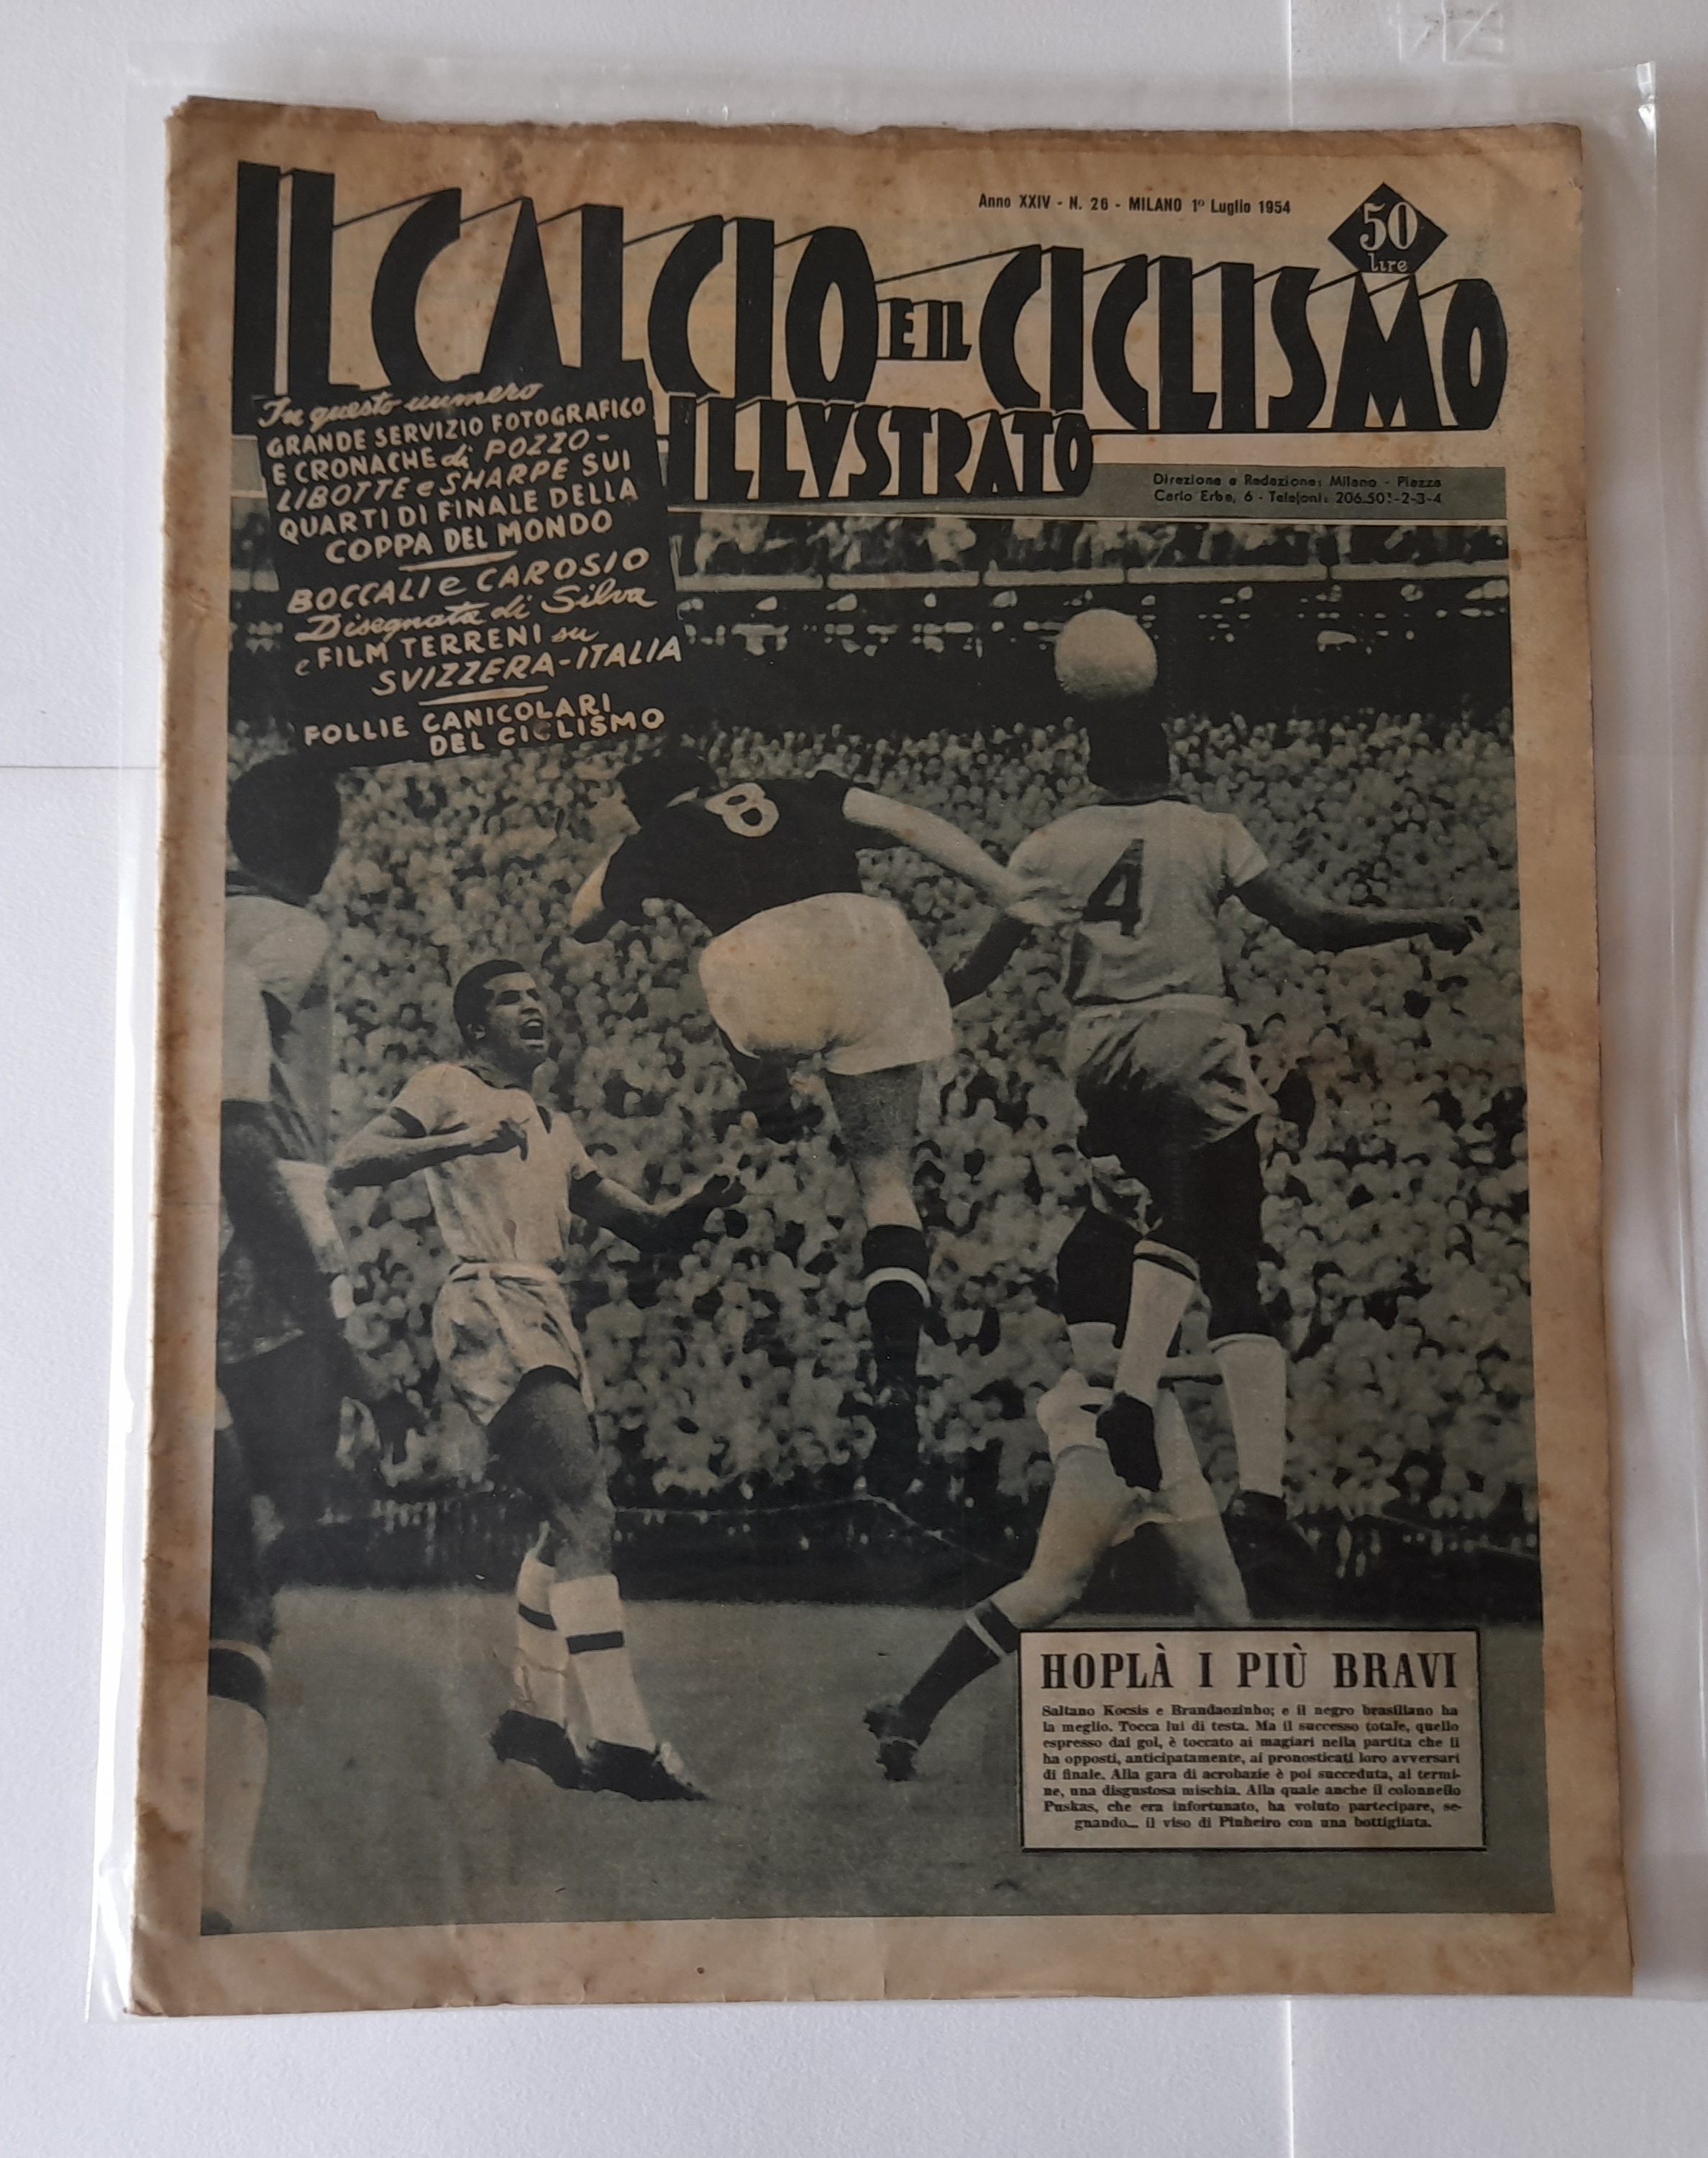 Illustrated Soccer and Cycling n 26. Juli 1954 AAA 4